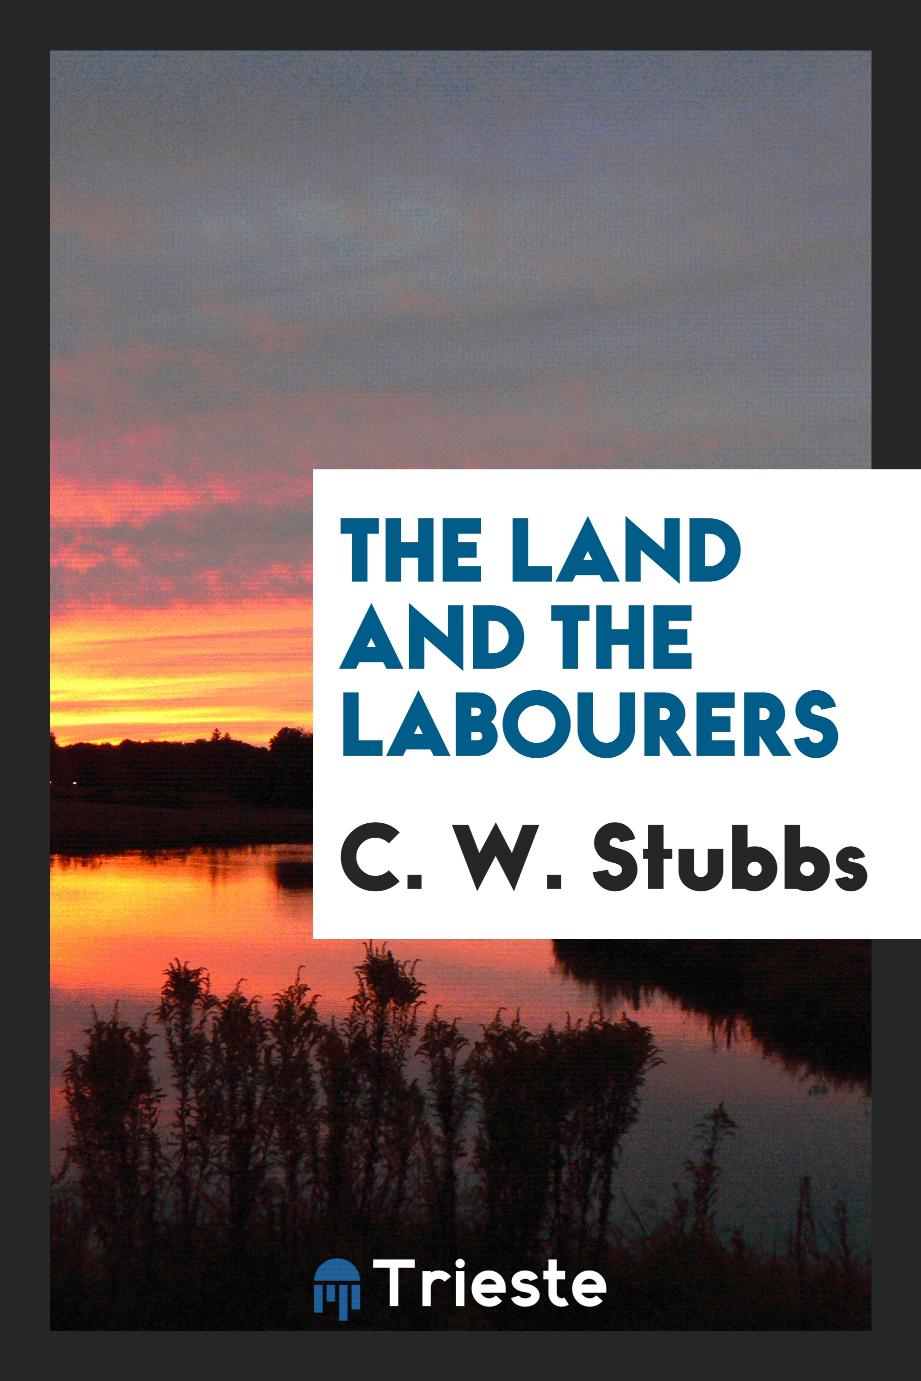 The land and the labourers